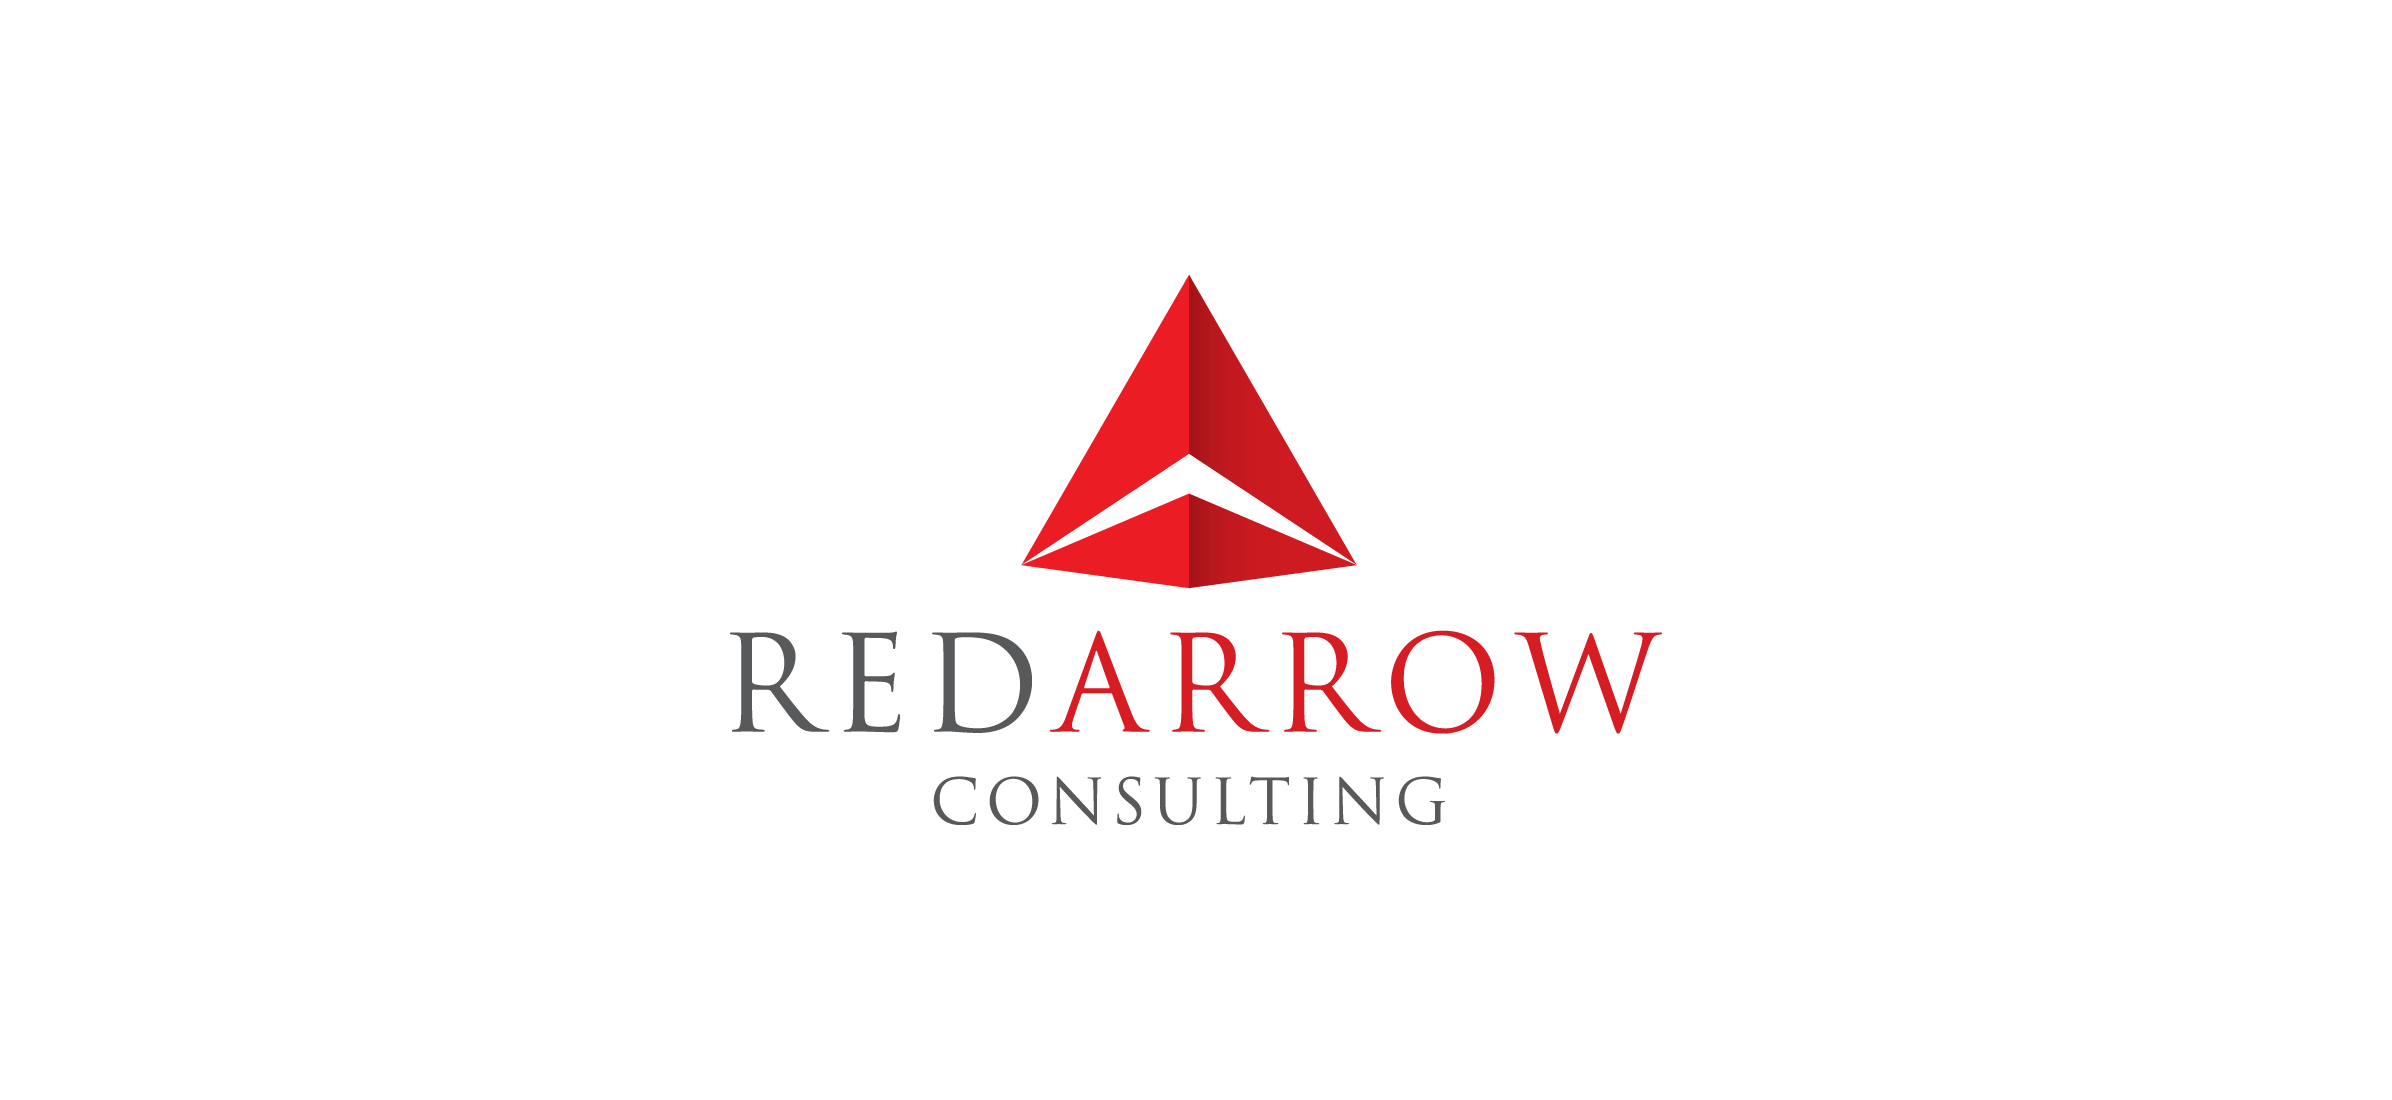 The Red Arrow Consulting logo